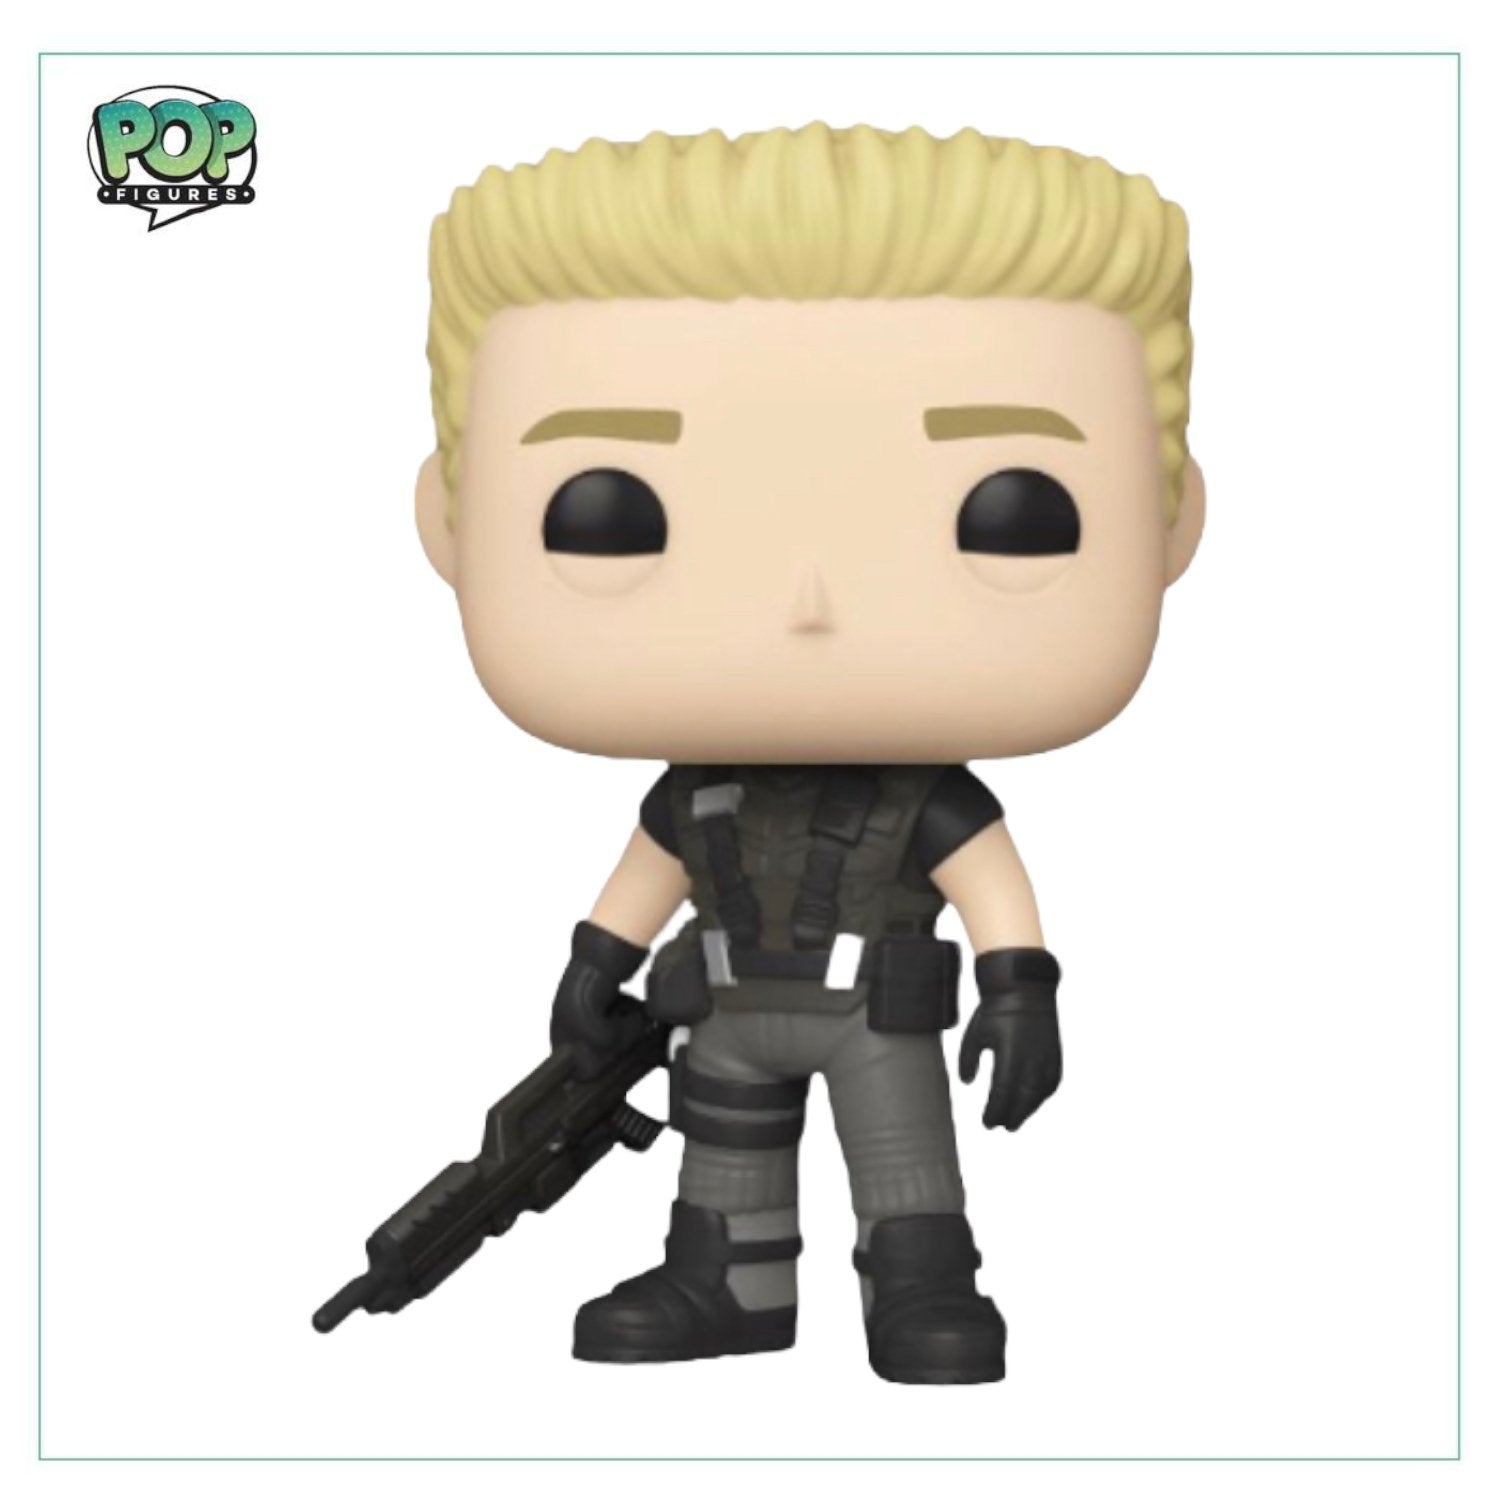 Ace Levy #1049 Funko Pop! Starship Troopers - Pop Figures | Funko | Pop Funko | Funko Pop